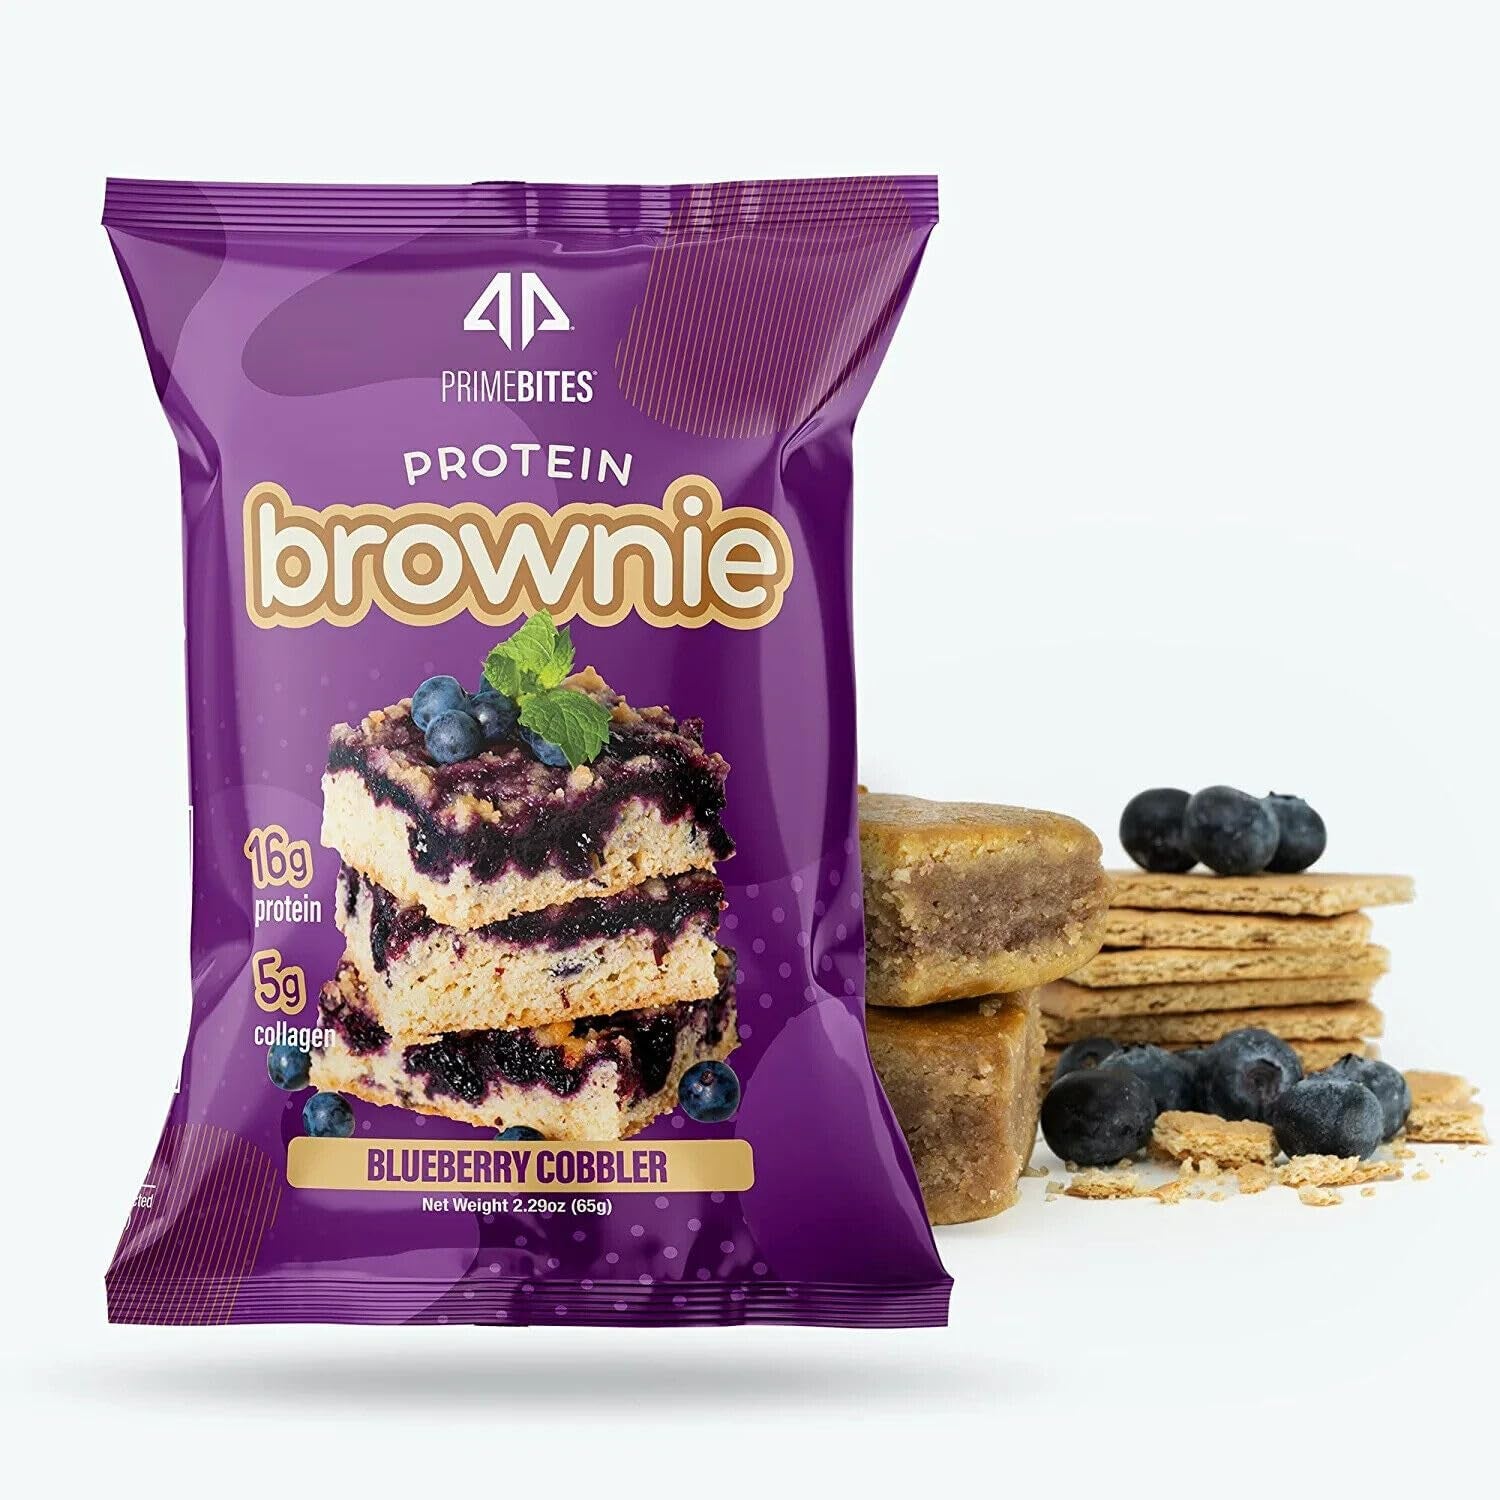 Primebites | Protein Brownie - Oven Baked, Delicious Guilt Free Snack, 17G Protein, 5G Collagen | (12) Brownies (Blueberry Cobbler)